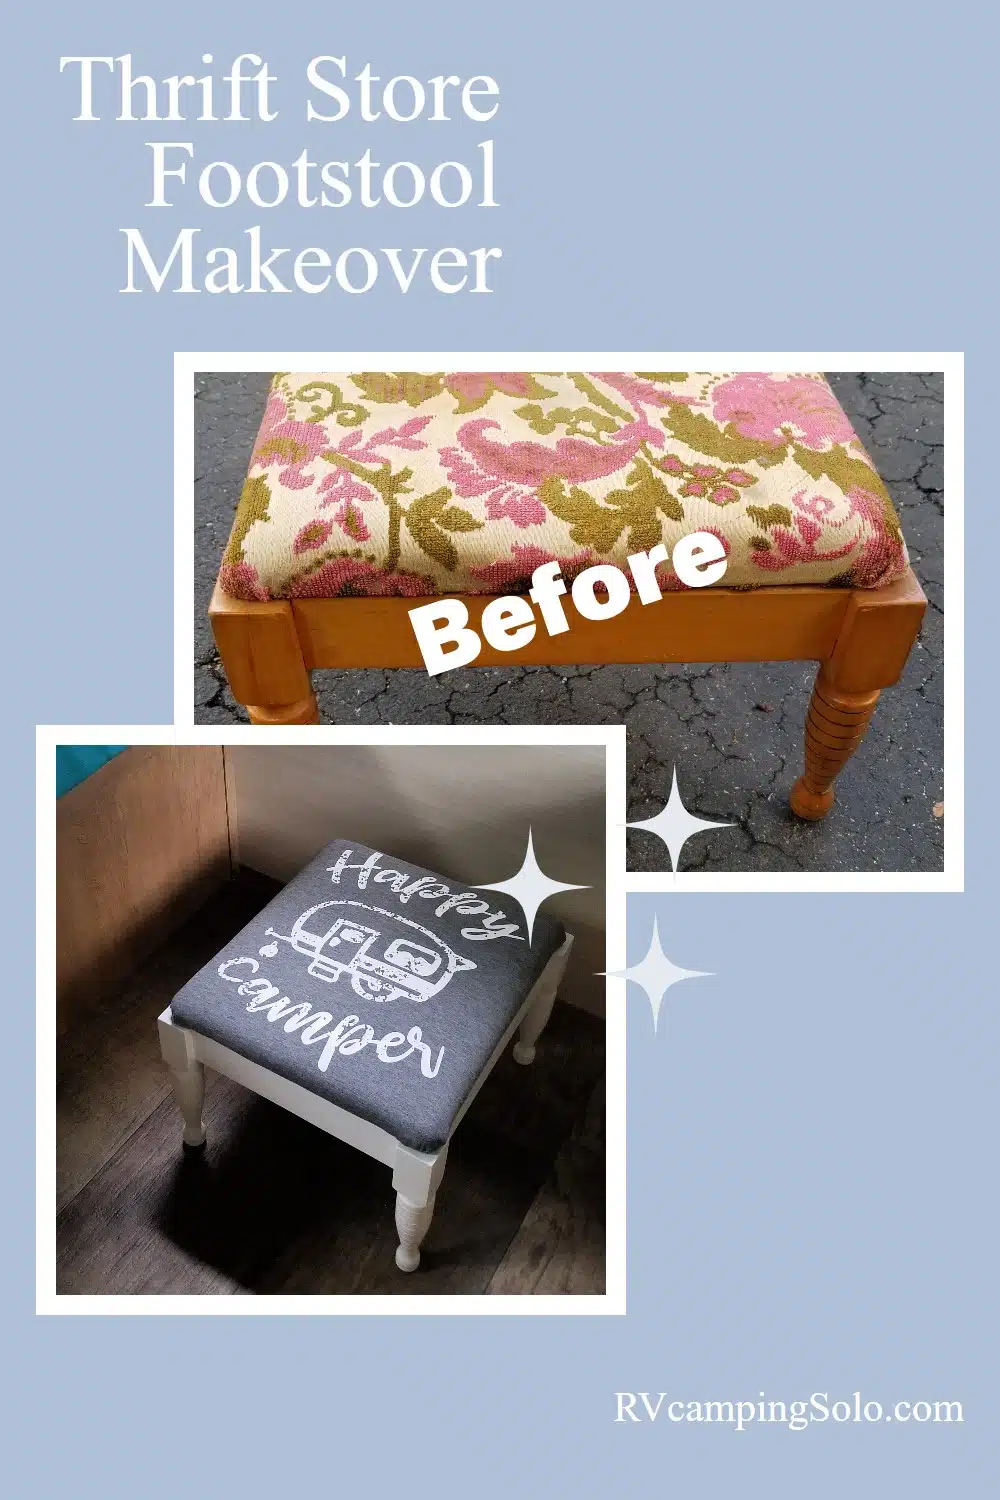 A small footstool from the thrift store gets a new purpose. A little paint, glaze and some new upholstery fabric using a Happy Camper t-shirt dressed it up. #RVcampingSolo via @repurposedlife